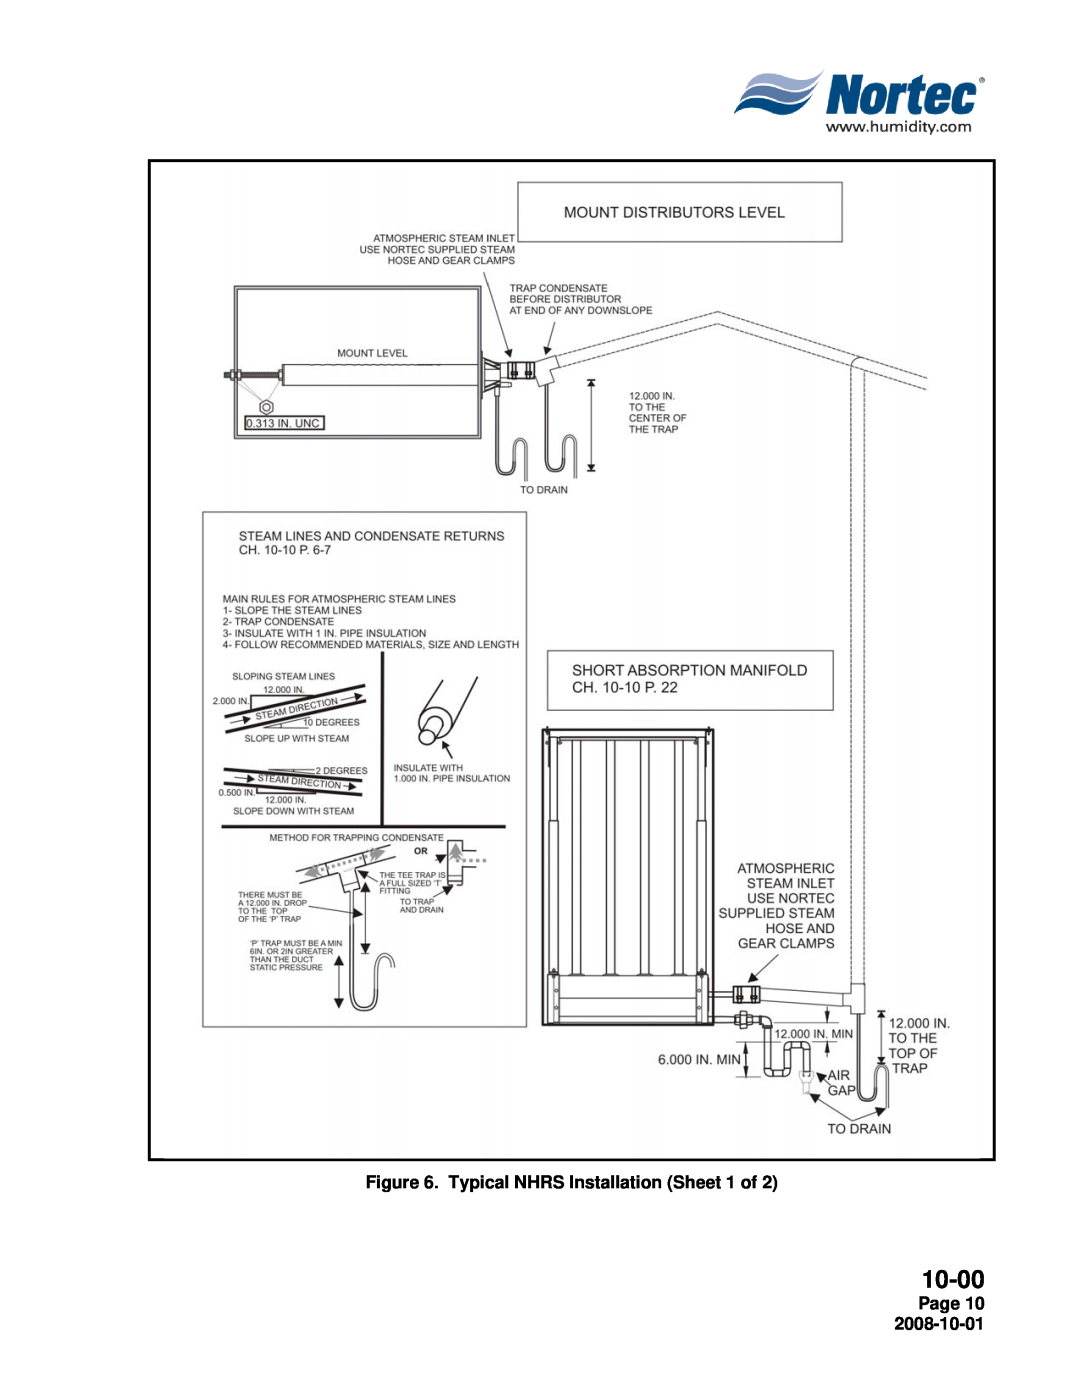 Nortec NHPC, NHTC manual 10-00, Typical NHRS Installation Sheet 1 of, Page 10 